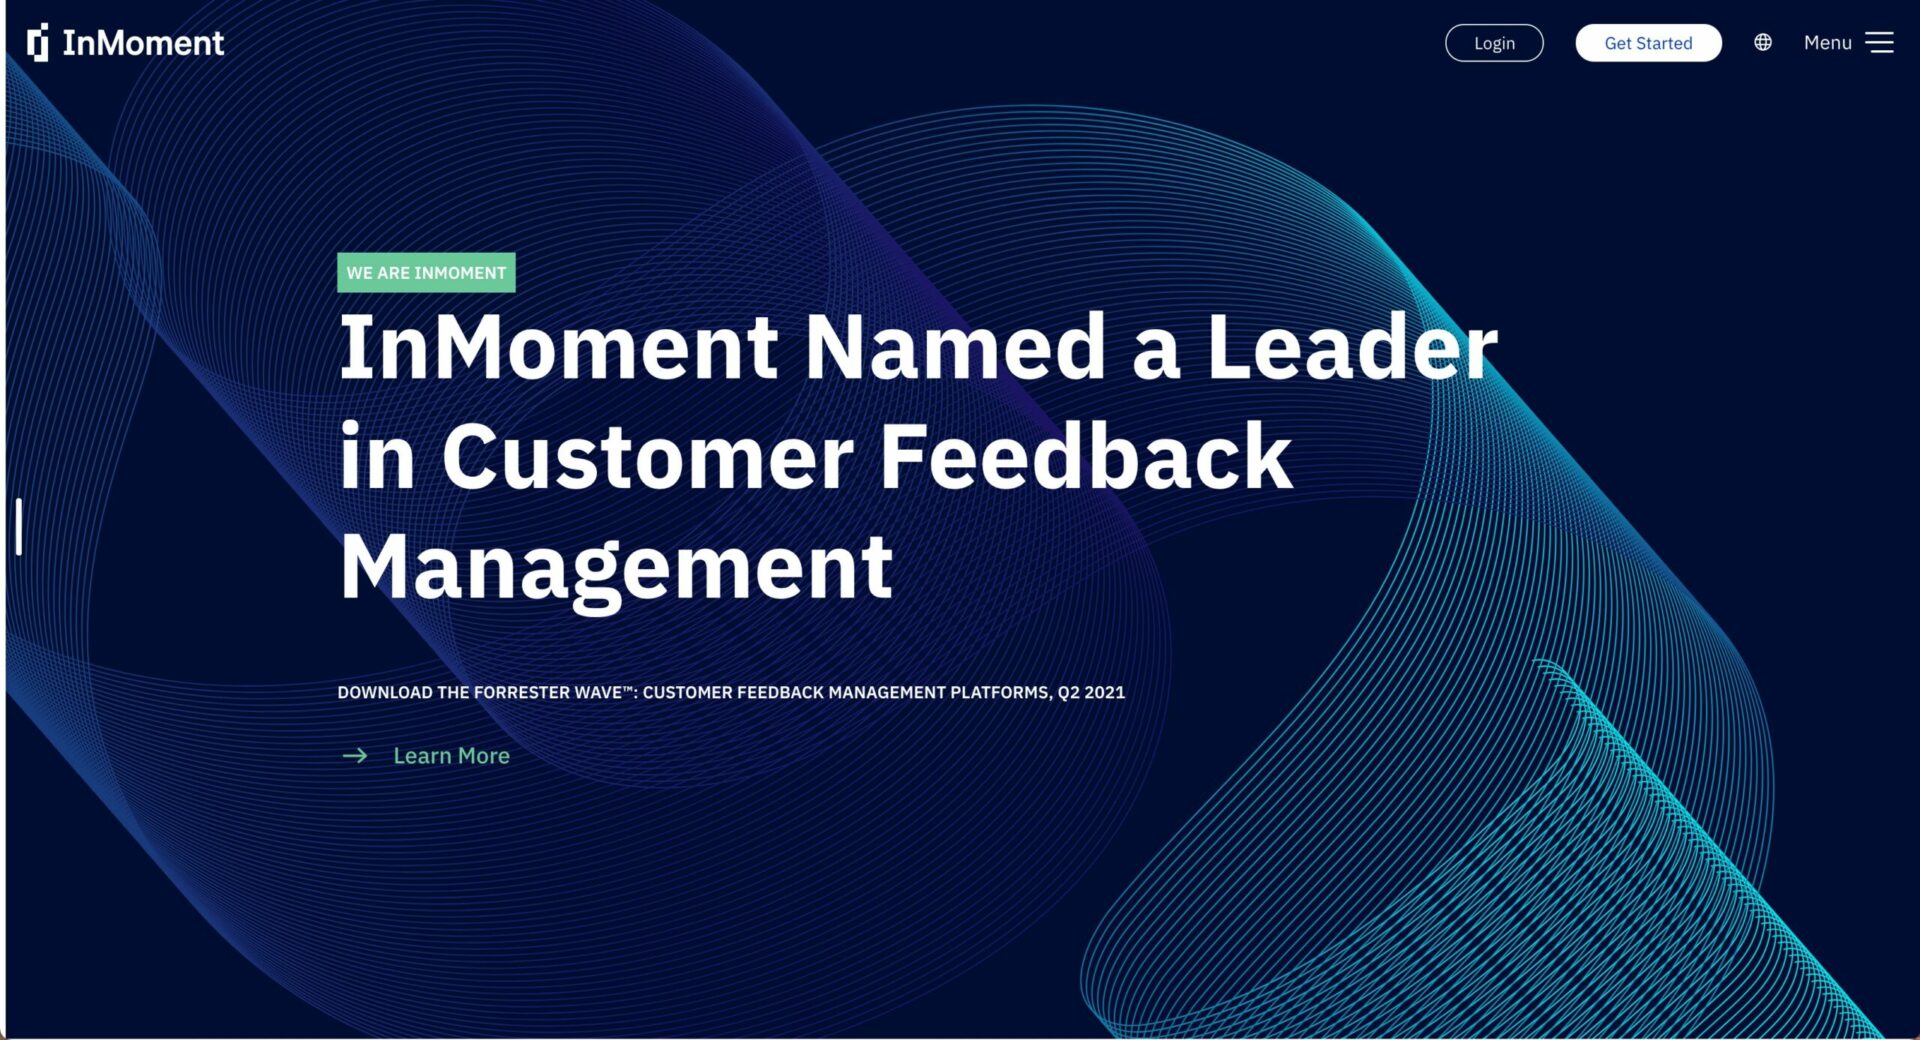 InMoment - Voice of the customer